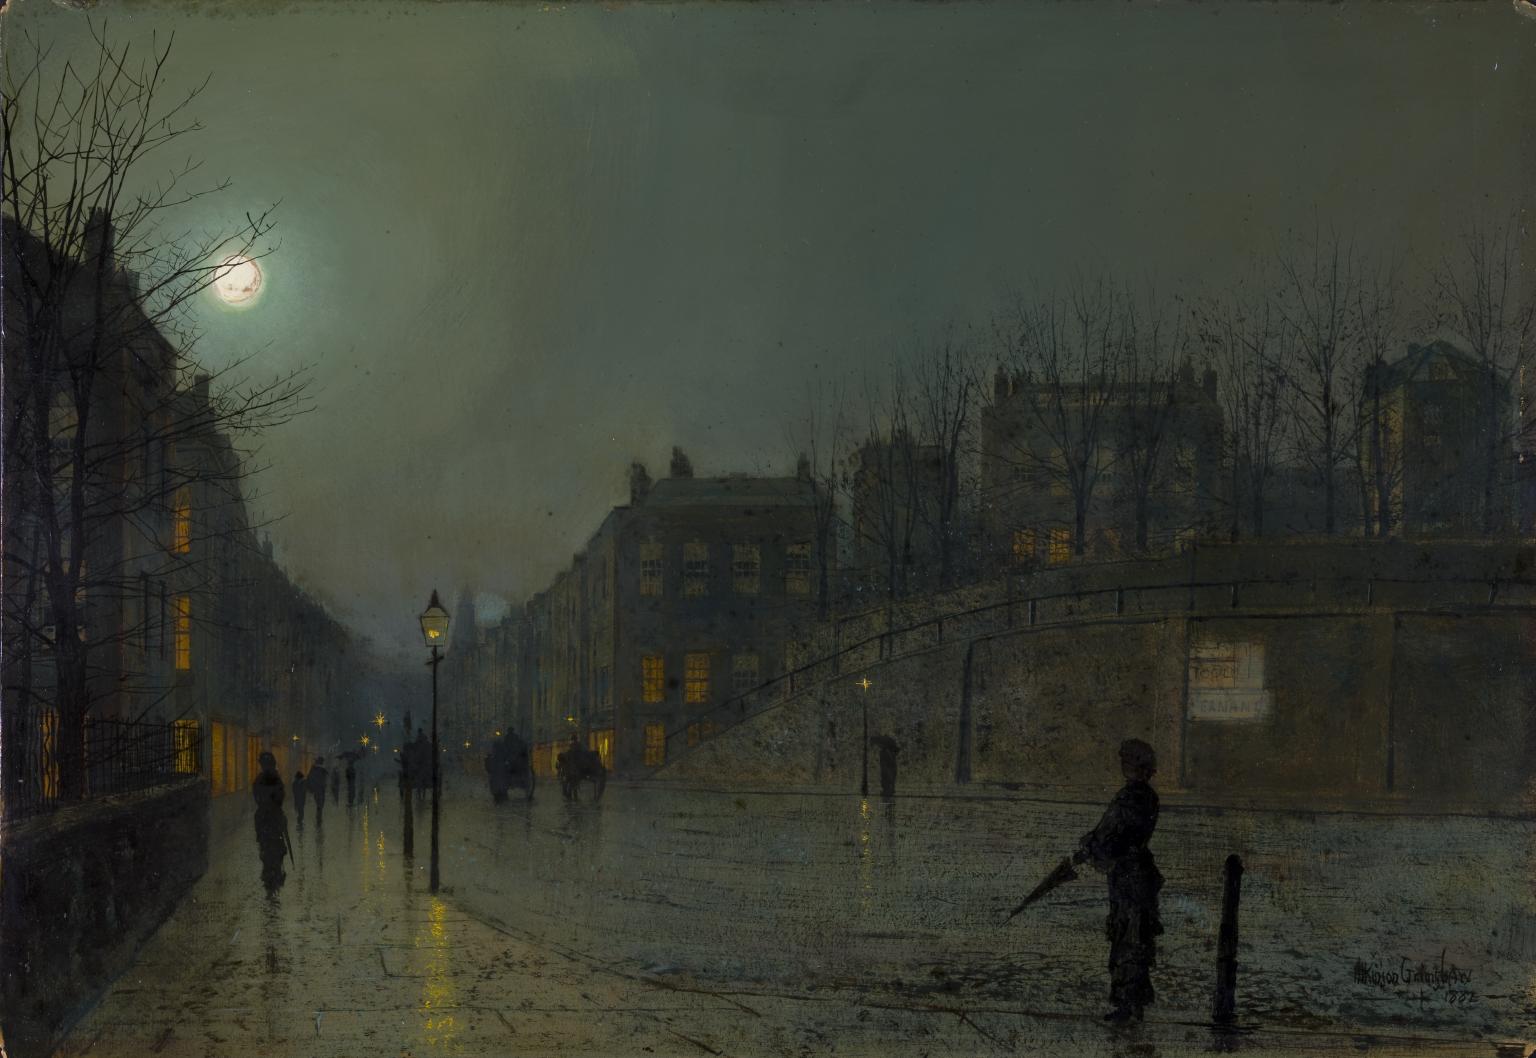 View of Heath Street by Night 1882 Atkinson Grimshaw 1836-1893 Purchased 1963 Tate http://www.tate.org.uk/art/work/T00626